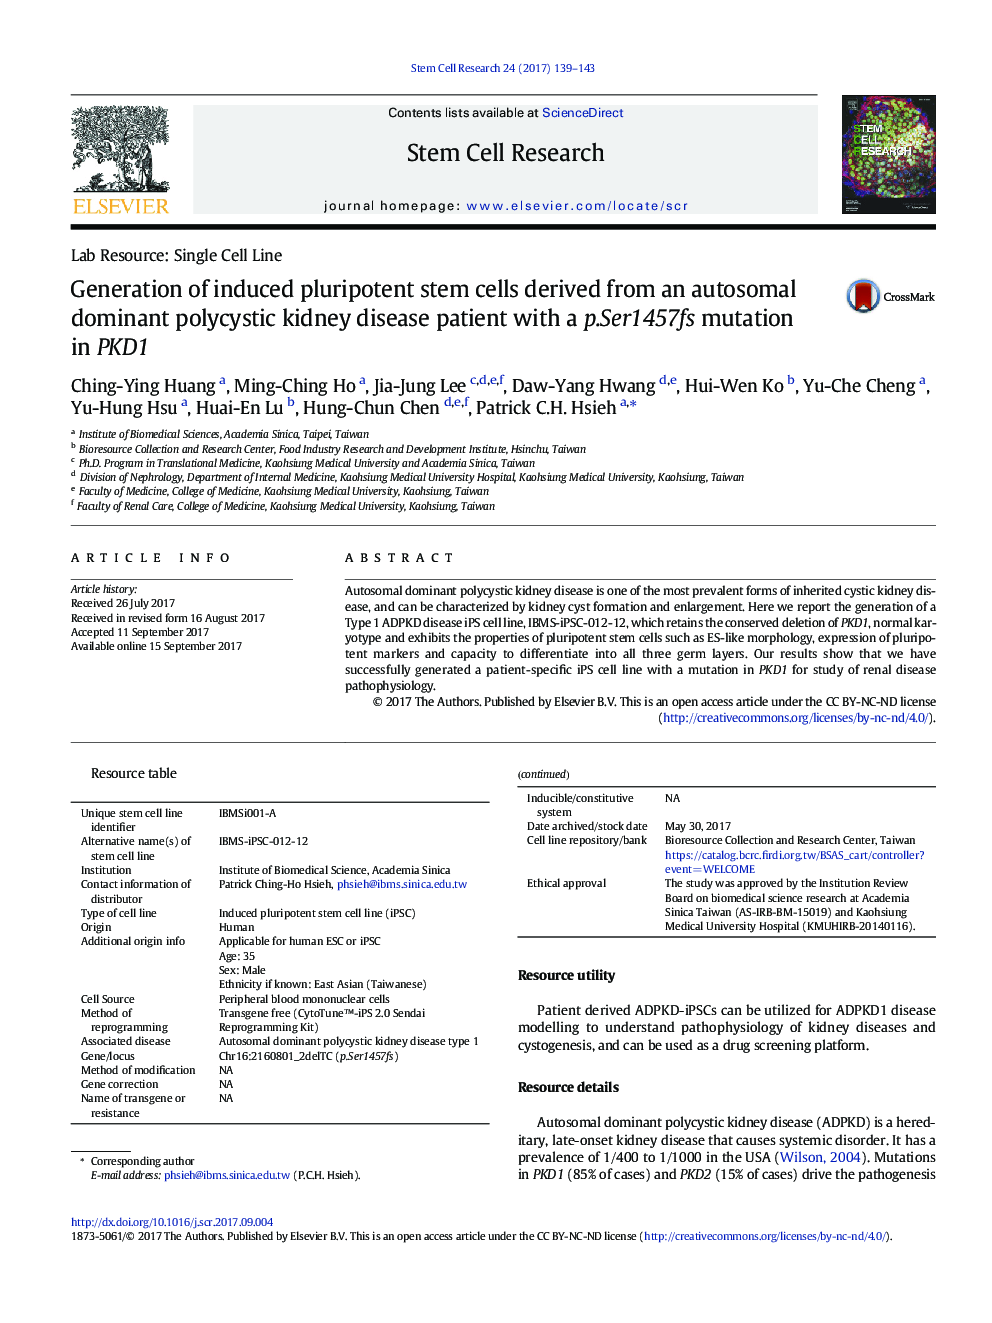 Generation of induced pluripotent stem cells derived from an autosomal dominant polycystic kidney disease patient with a p.Ser1457fs mutation in PKD1